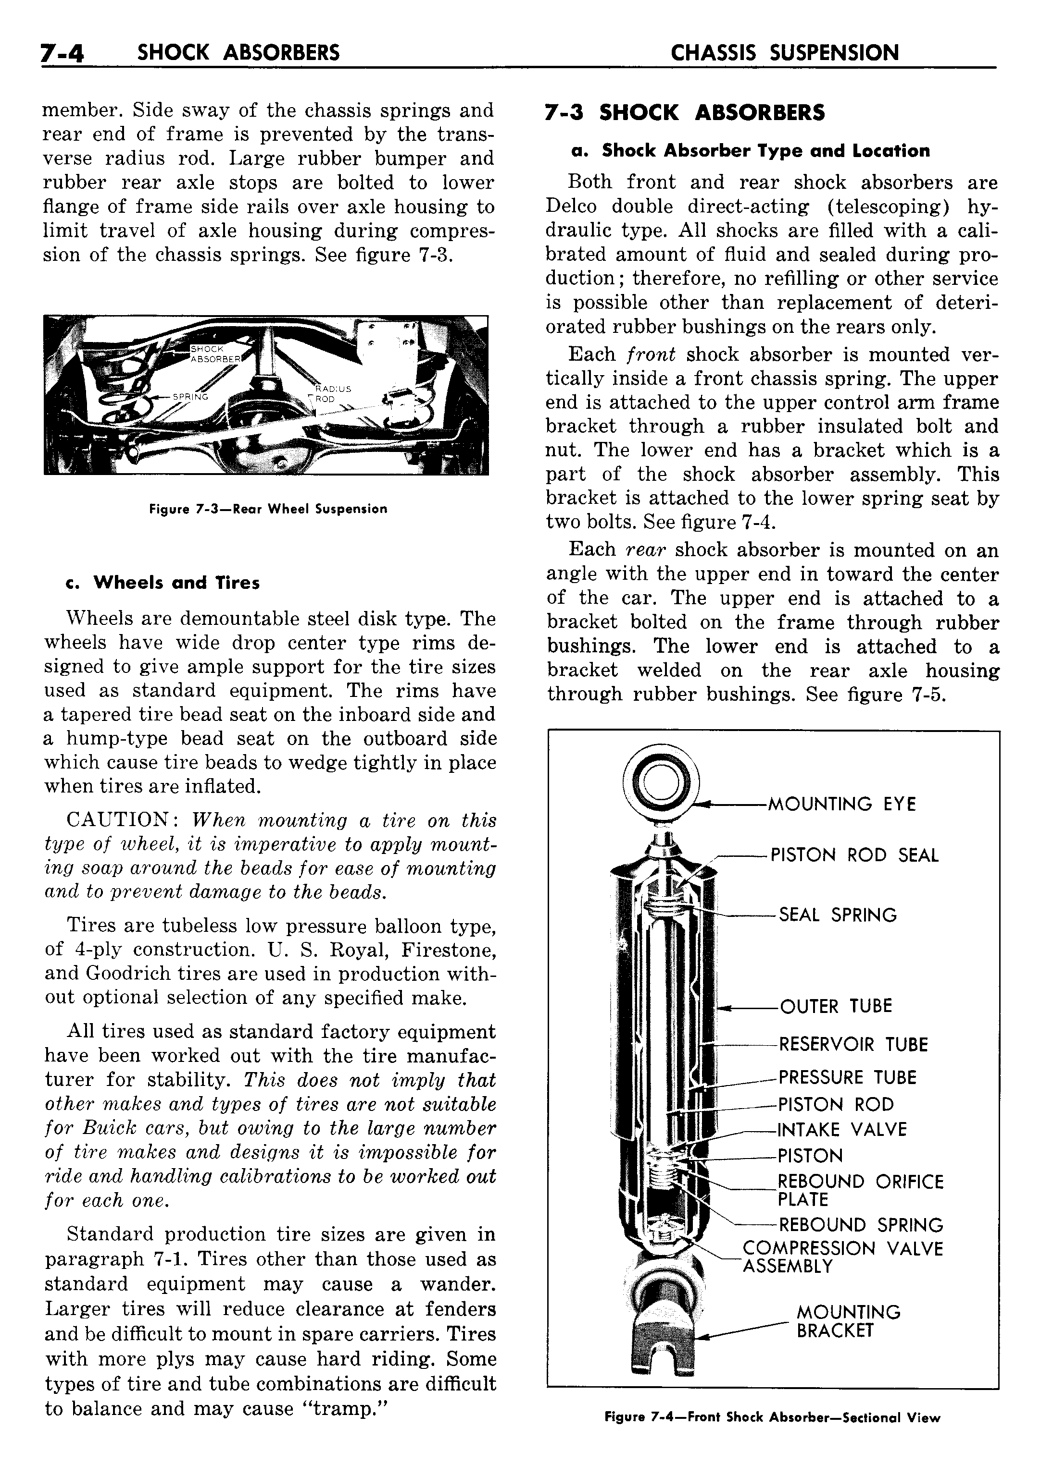 n_08 1957 Buick Shop Manual - Chassis Suspension-004-004.jpg